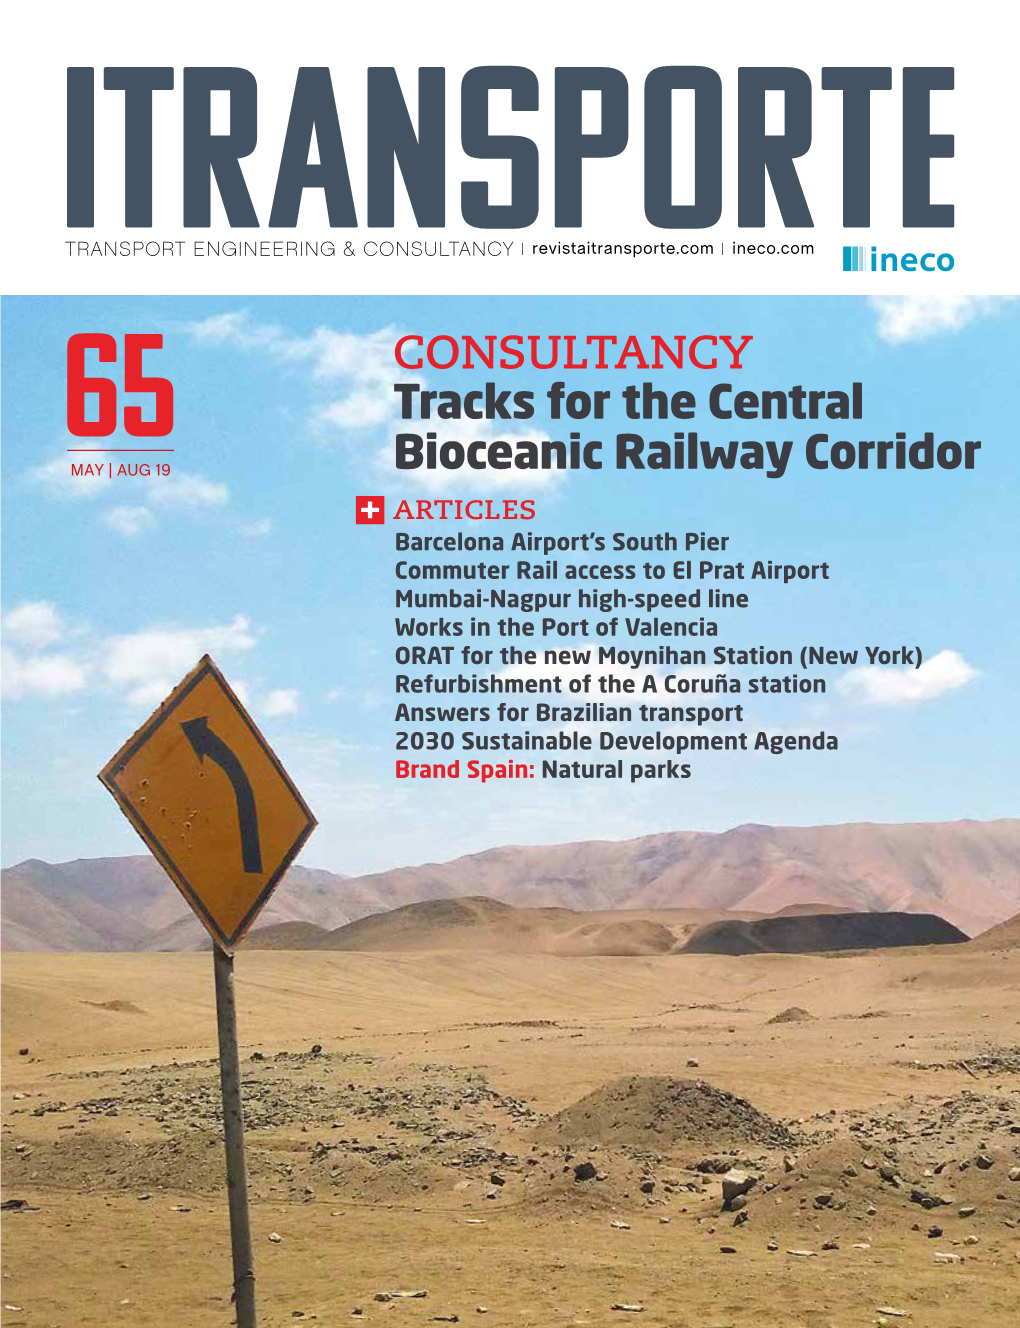 CONSULTANCY Tracks for the Central Bioceanic Railway Corridor